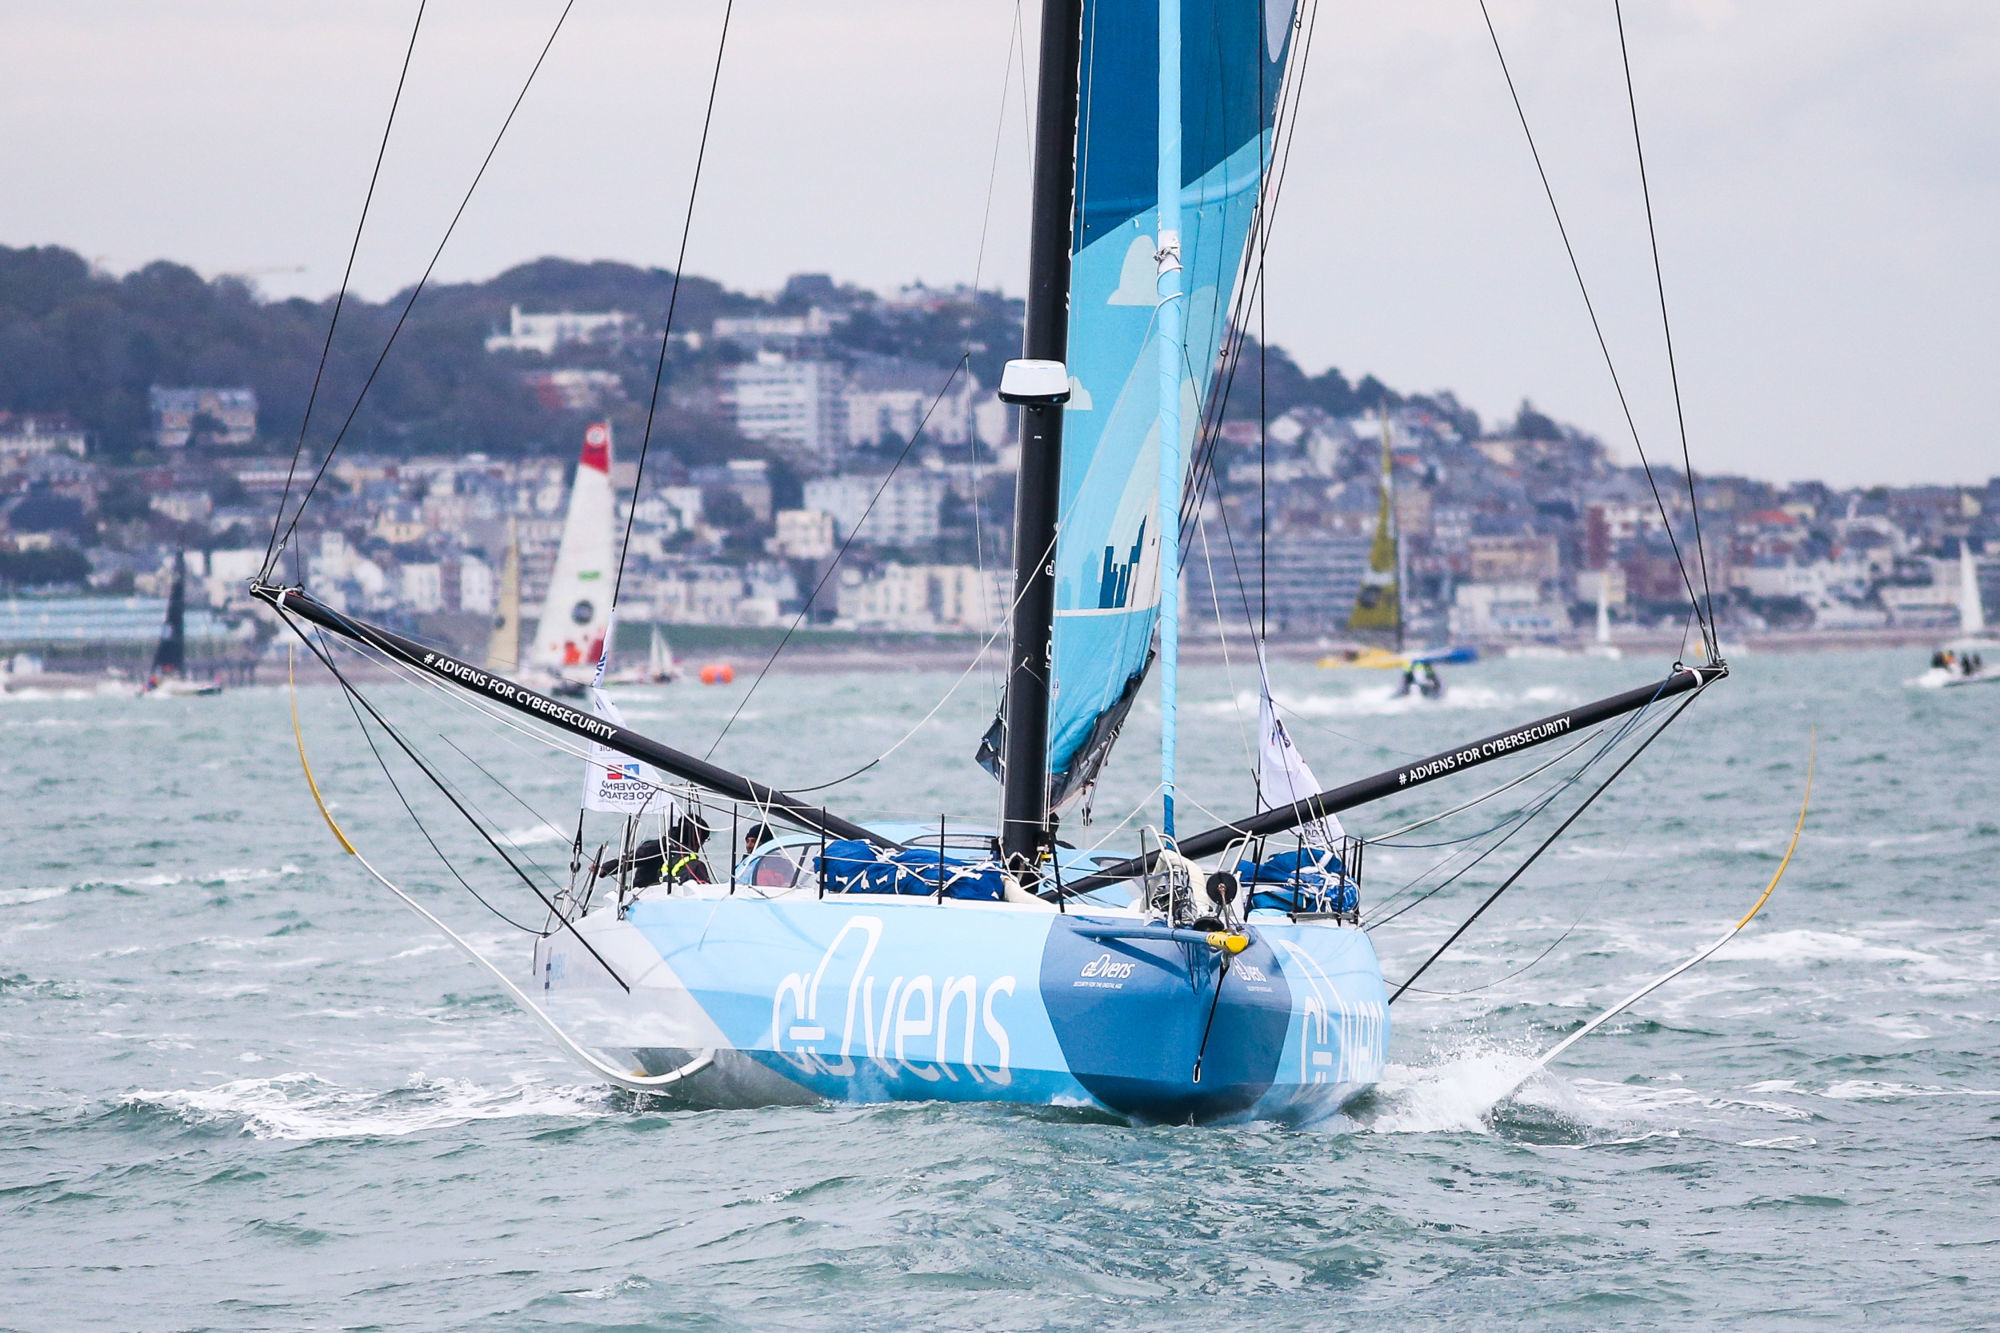 Thomas RUYANT and Antoine KOCH of Imoca Advens for cybersecurity during the Transat Jacques Vabre on October 27, 2019 in Le Havre, France. (Photo by Maxime Le Pihif/Icon Sport) - Thomas RUYANT - Antoine KOCH - Le Havre (France)